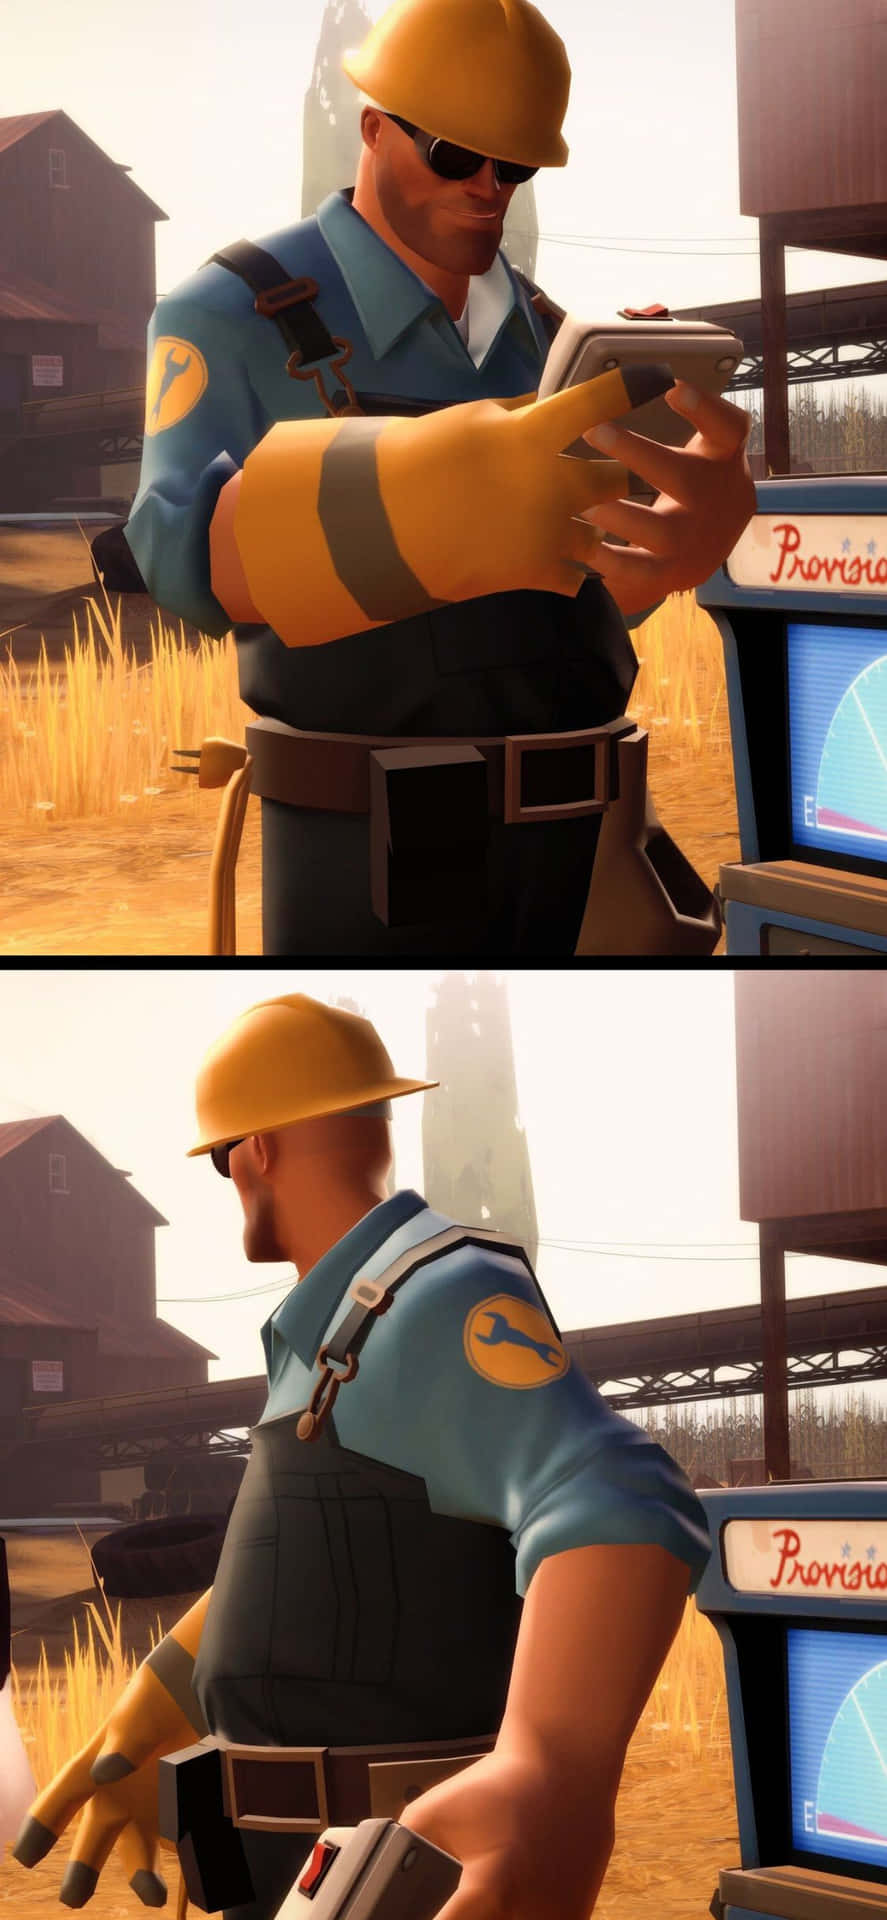 Iphone Xs Tf2 Background Engineer Building A Dispenser